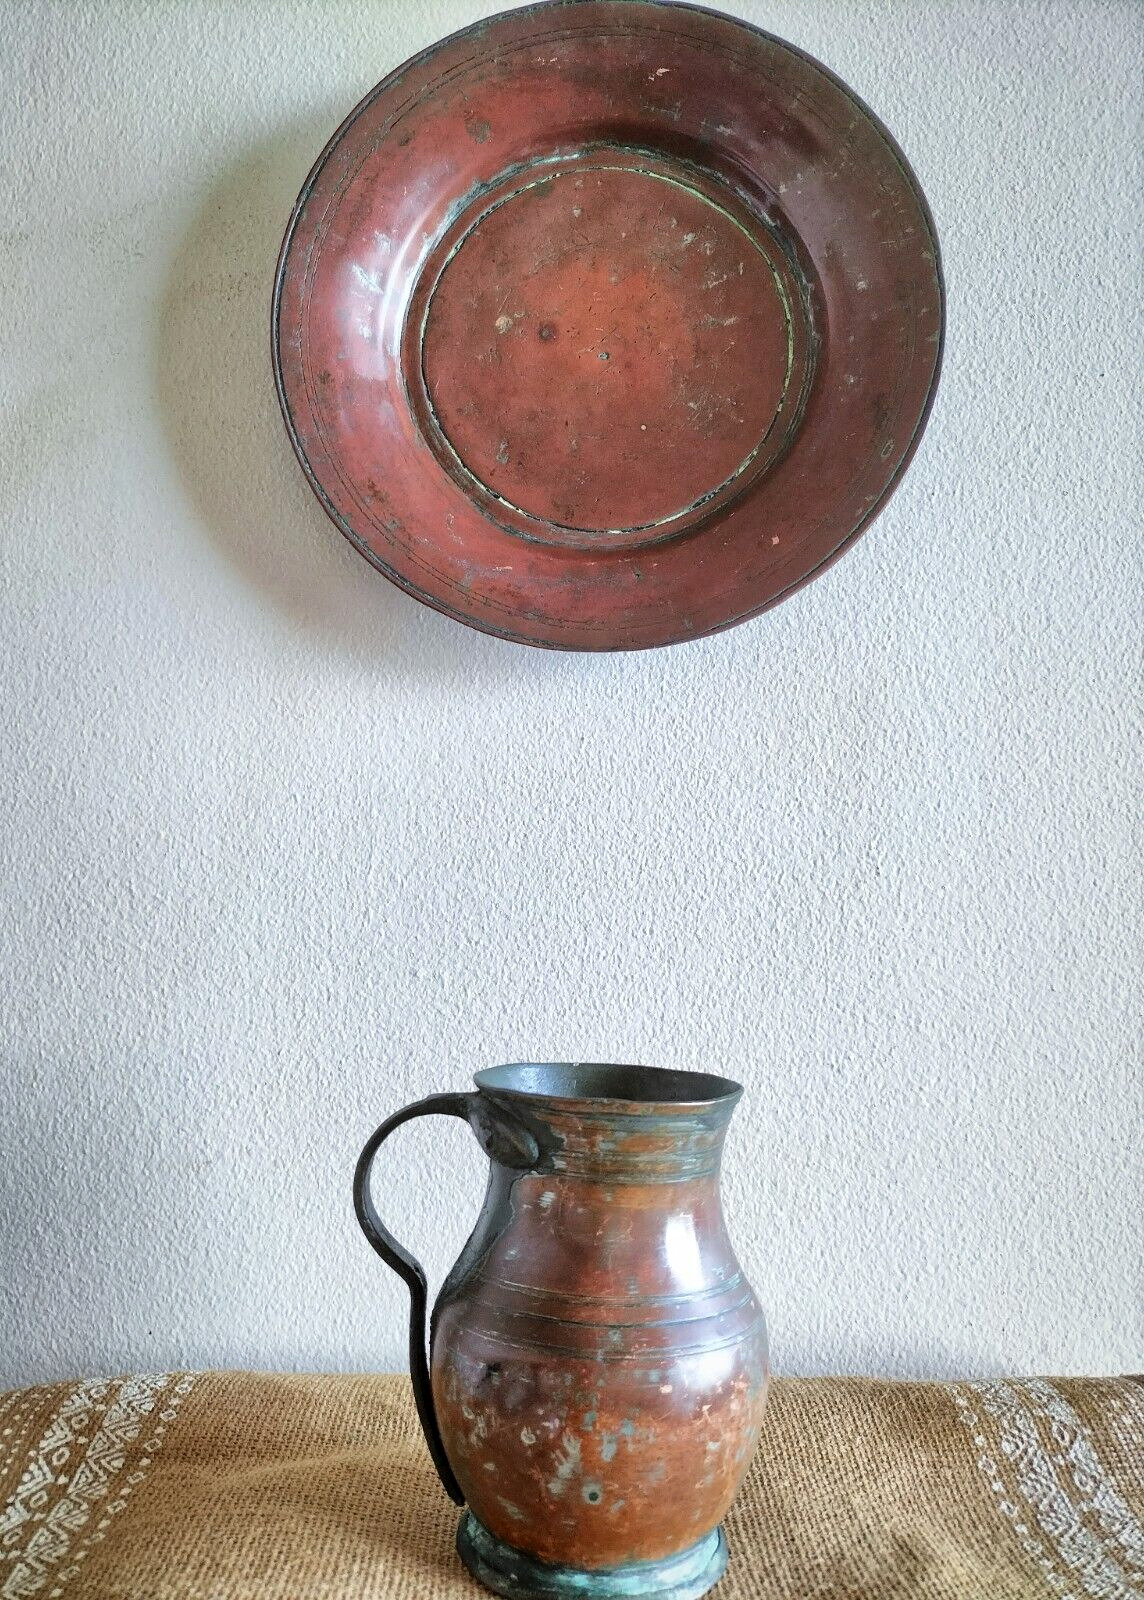 Rustic vintage copper plate and small jug